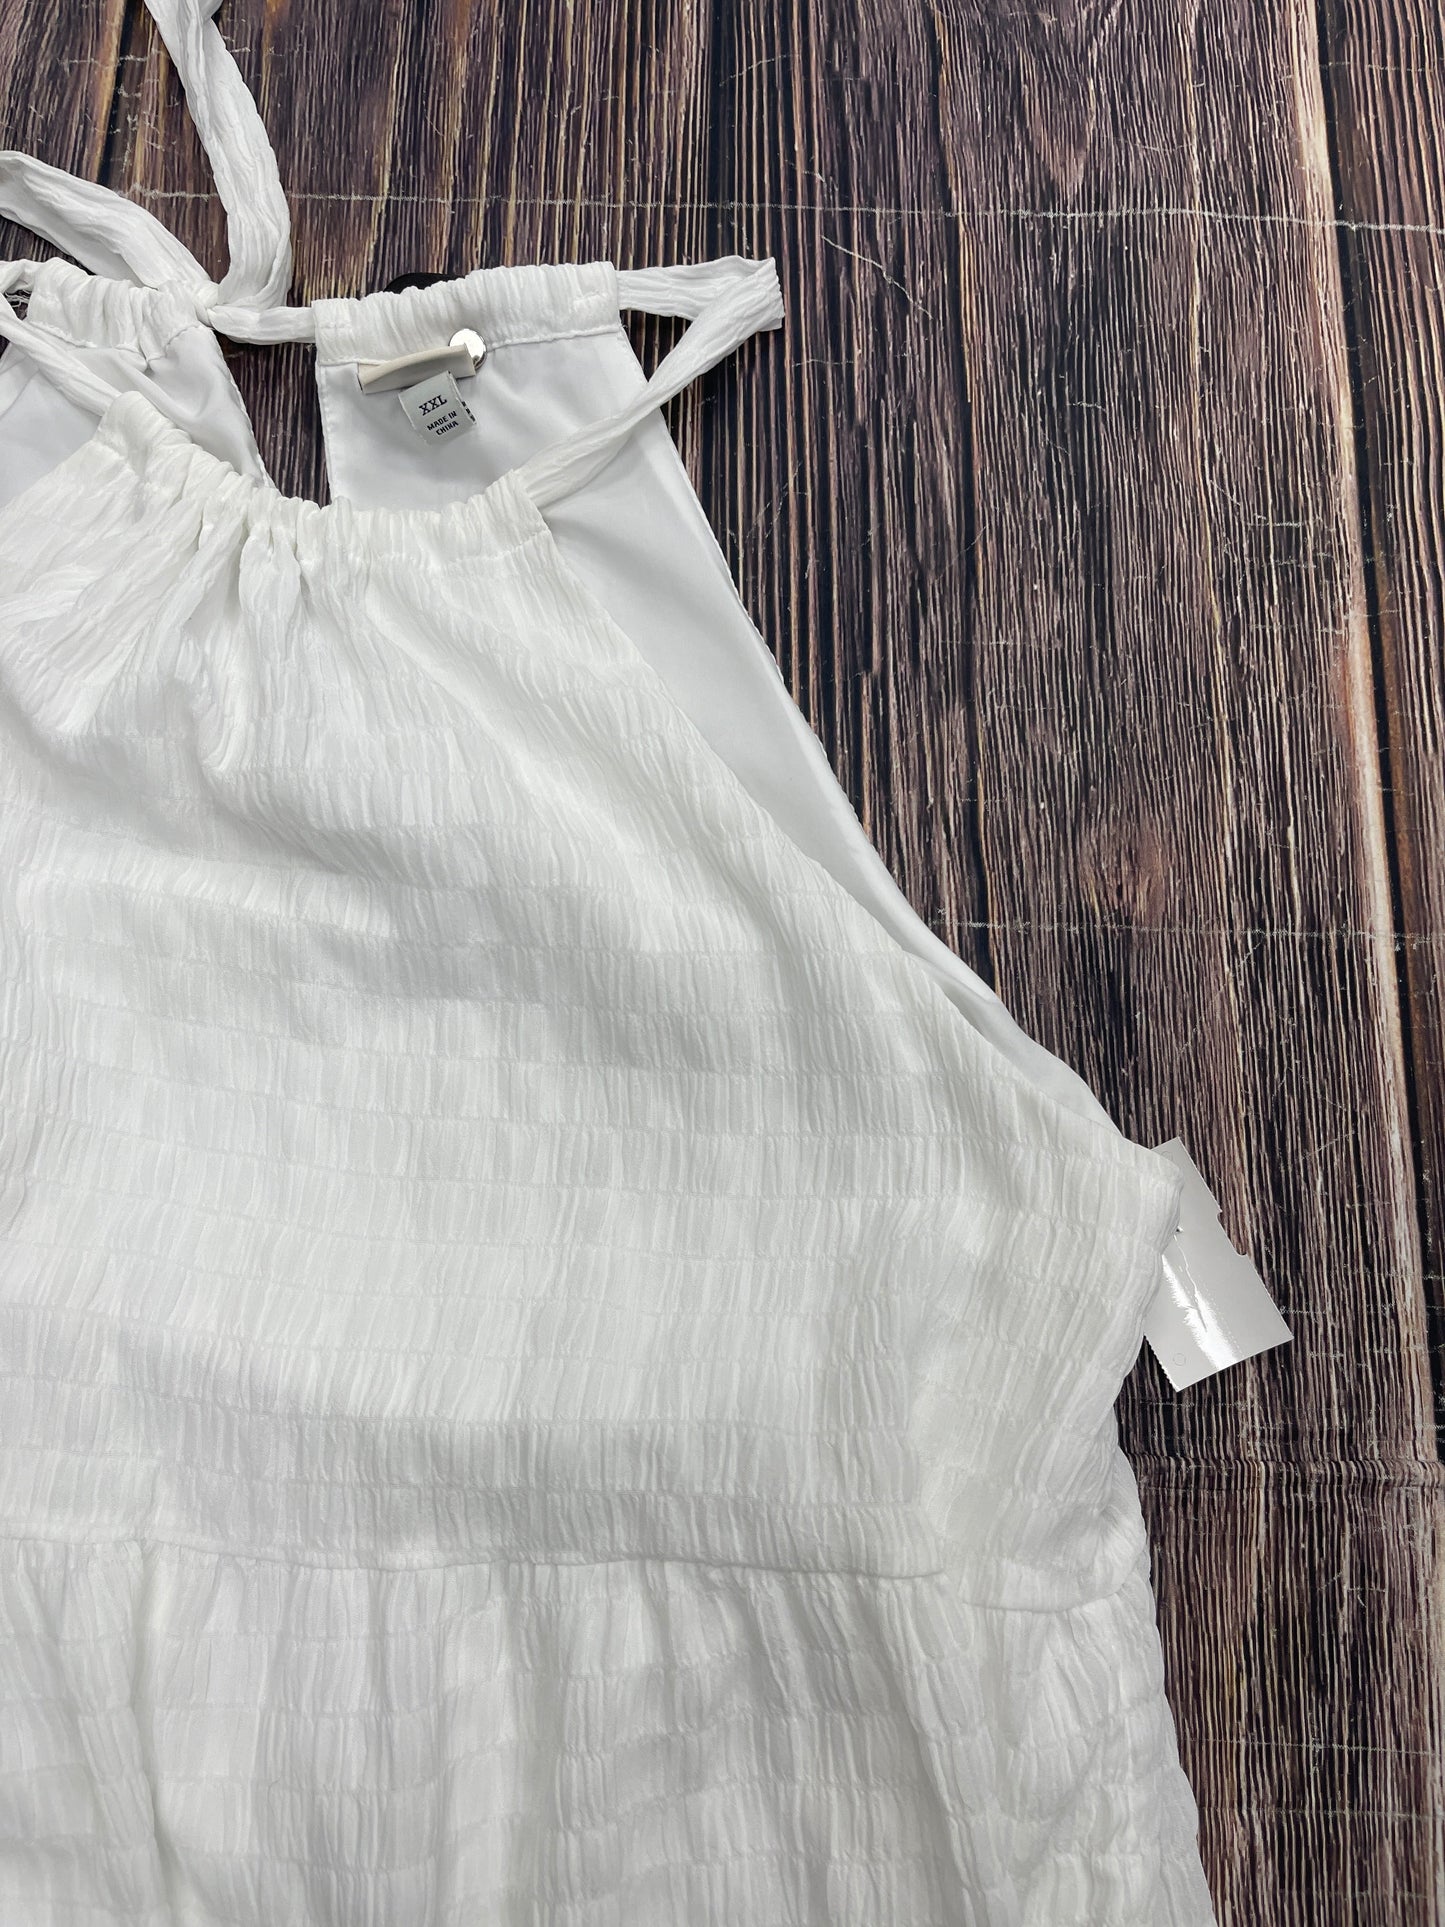 White Dress Casual Short A New Day, Size 1x